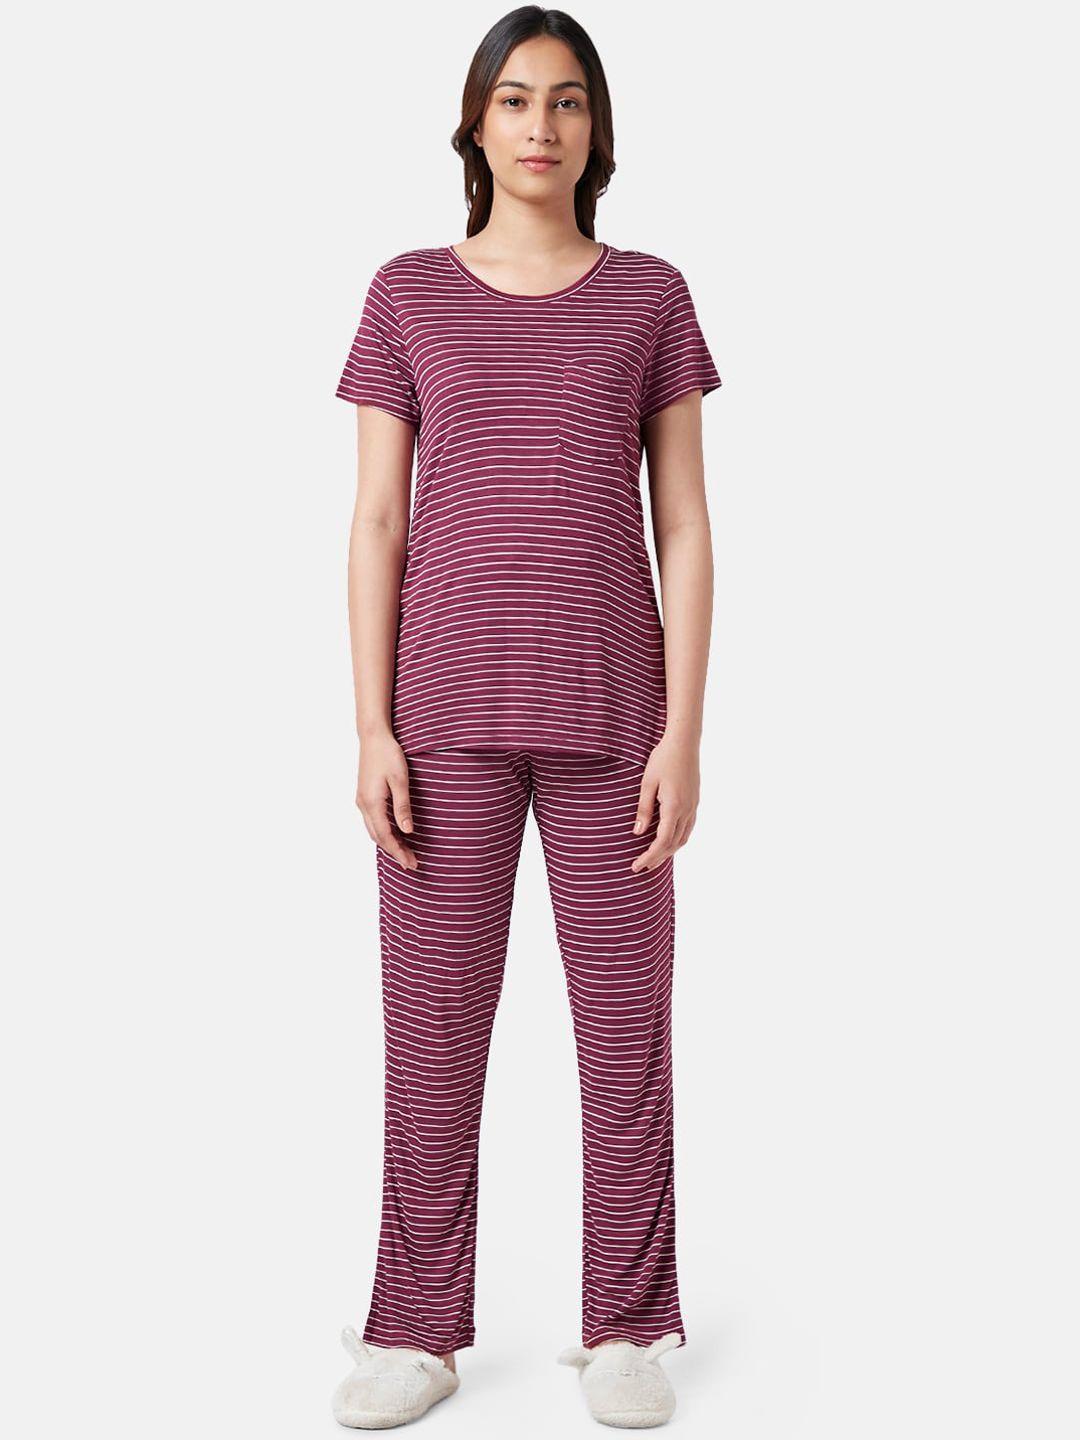 dreamz-by-pantaloons-striped-night-suit